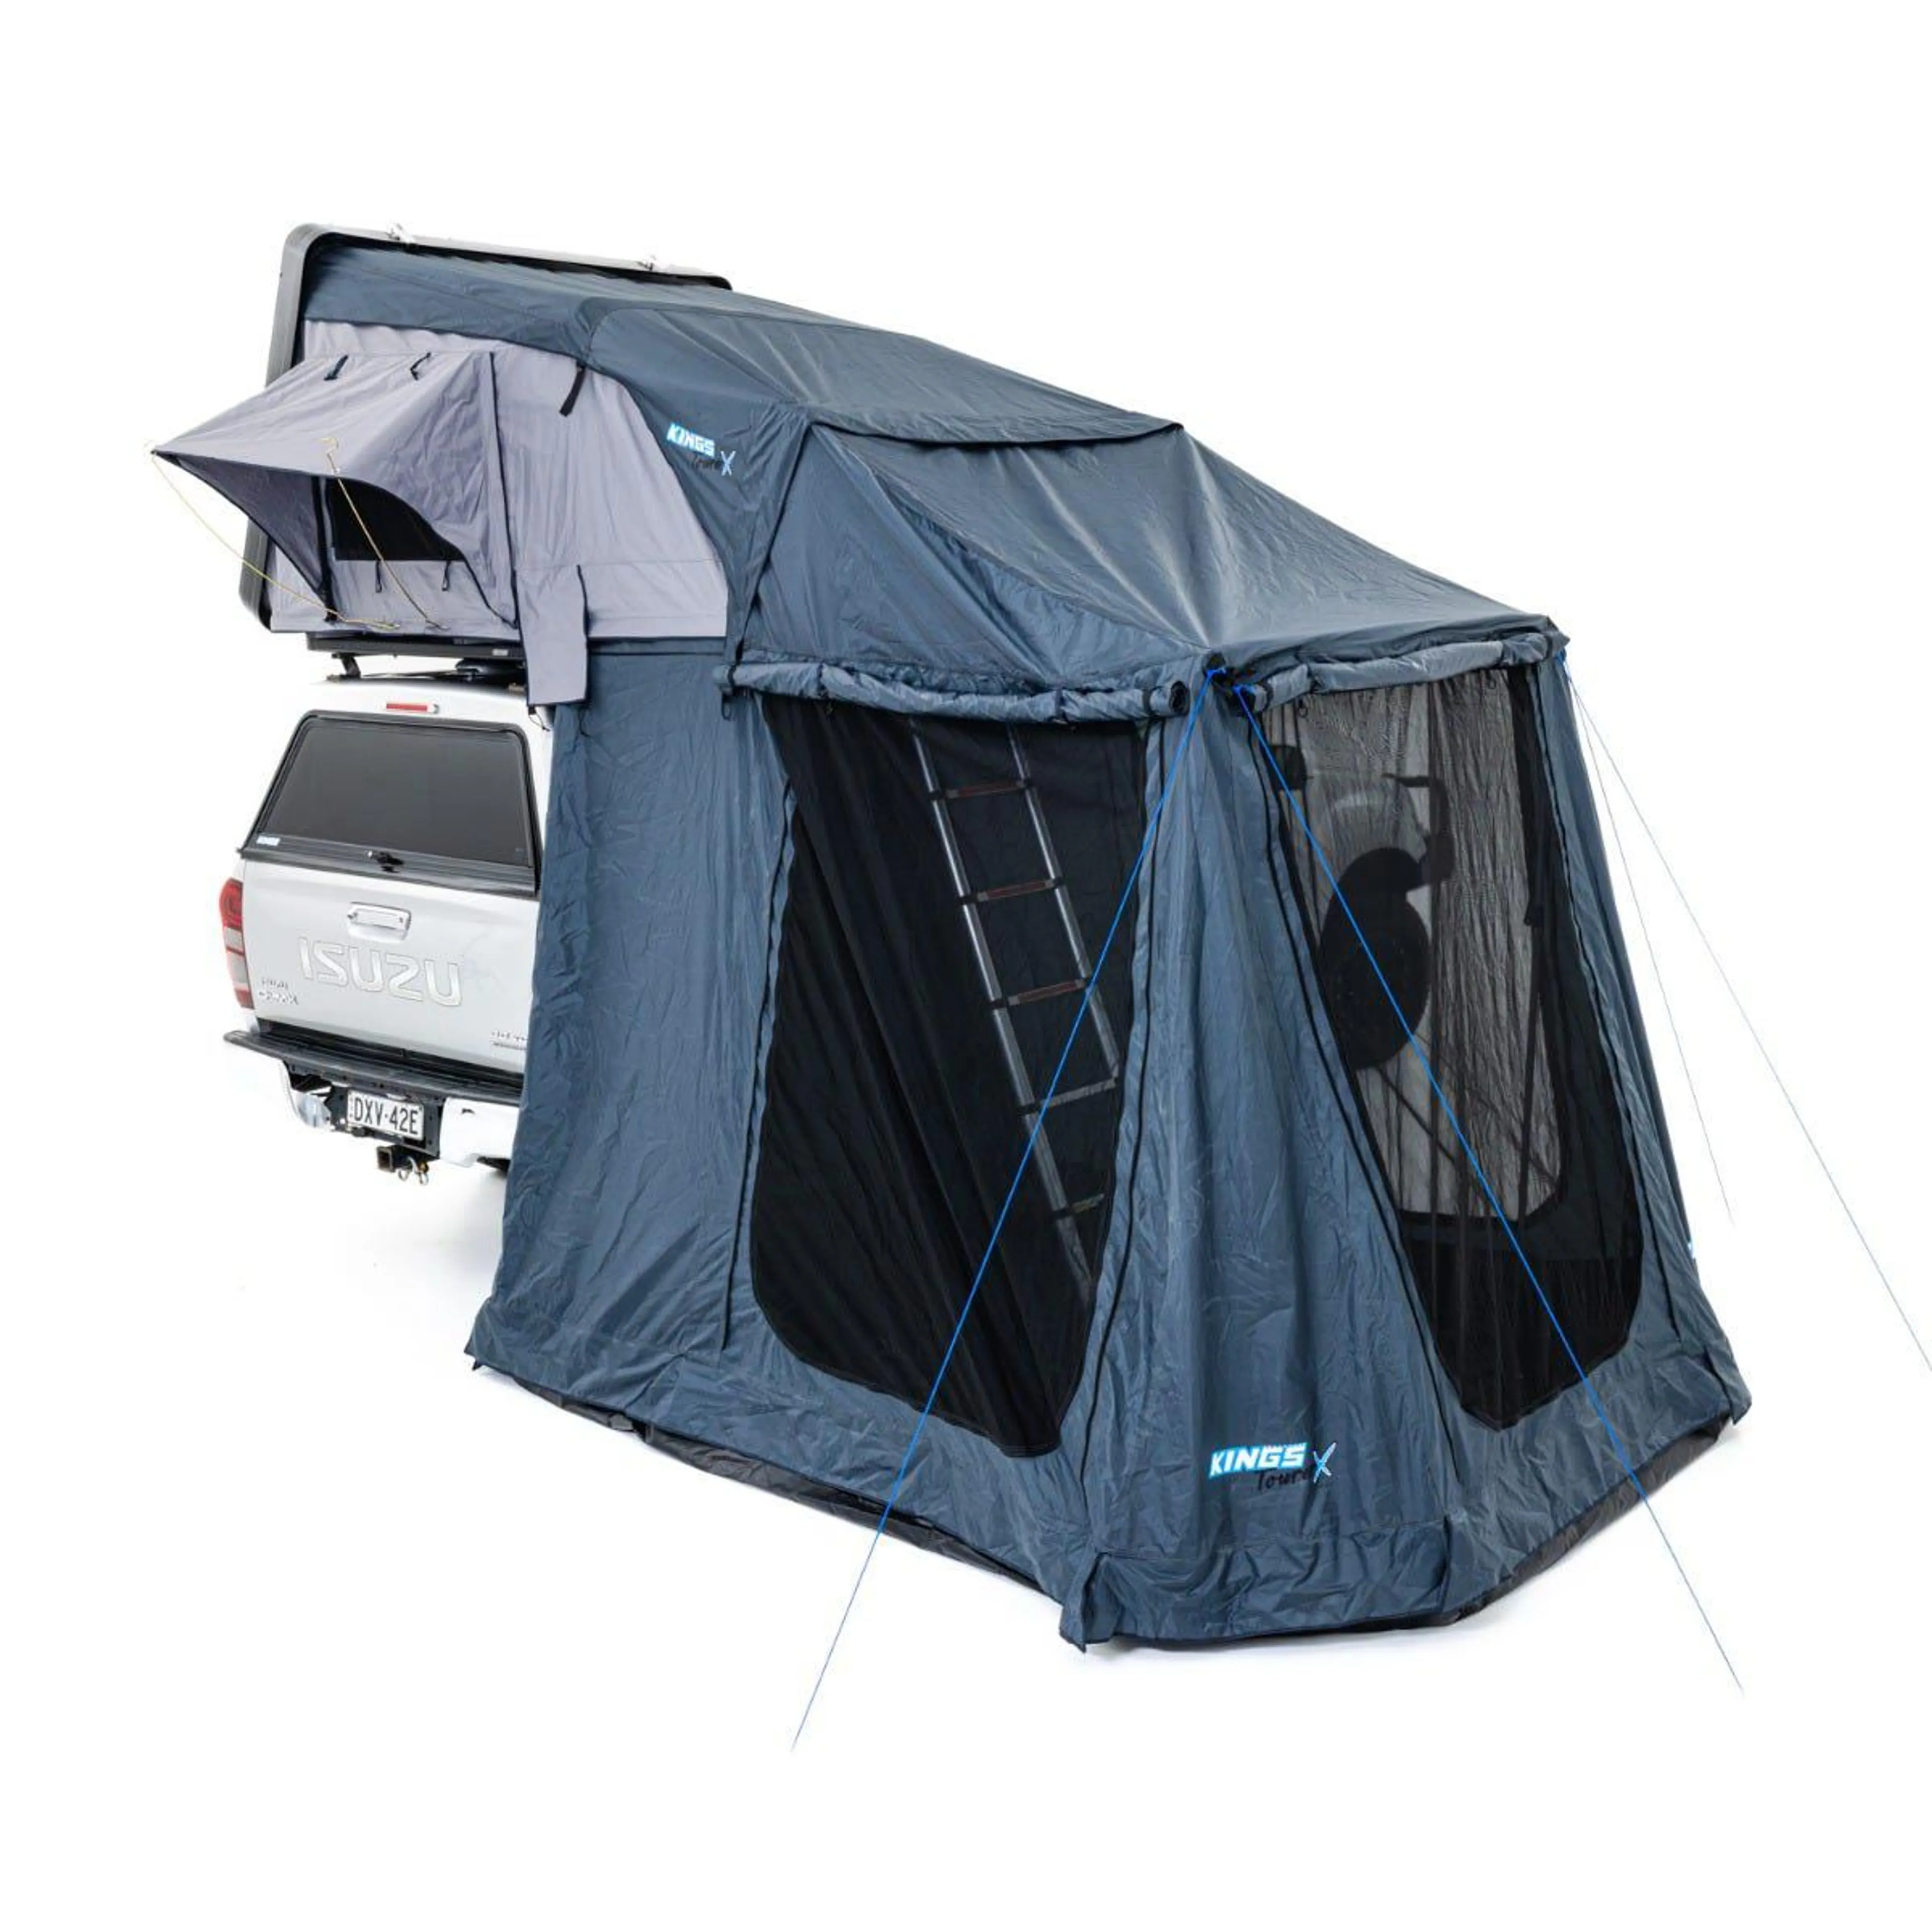 Kings Tourer X 1600 Side-Opening Rooftop Tent Annex | 7 sqm Space | 5-Person | PVC Bucket Floor